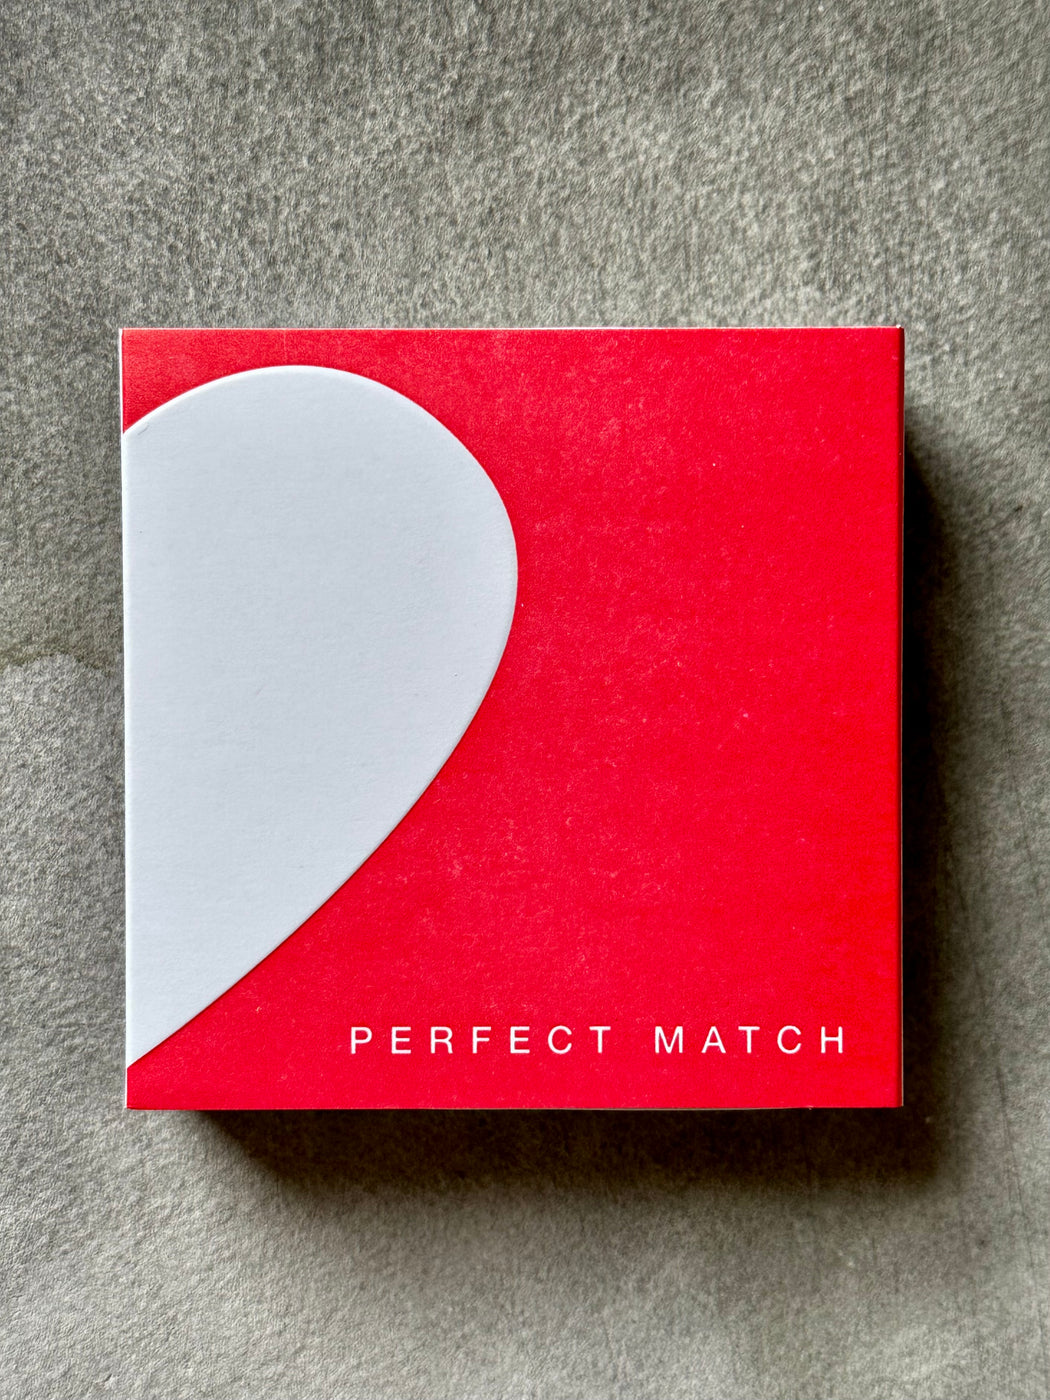 "Heart" Matches by Archivist Gallery